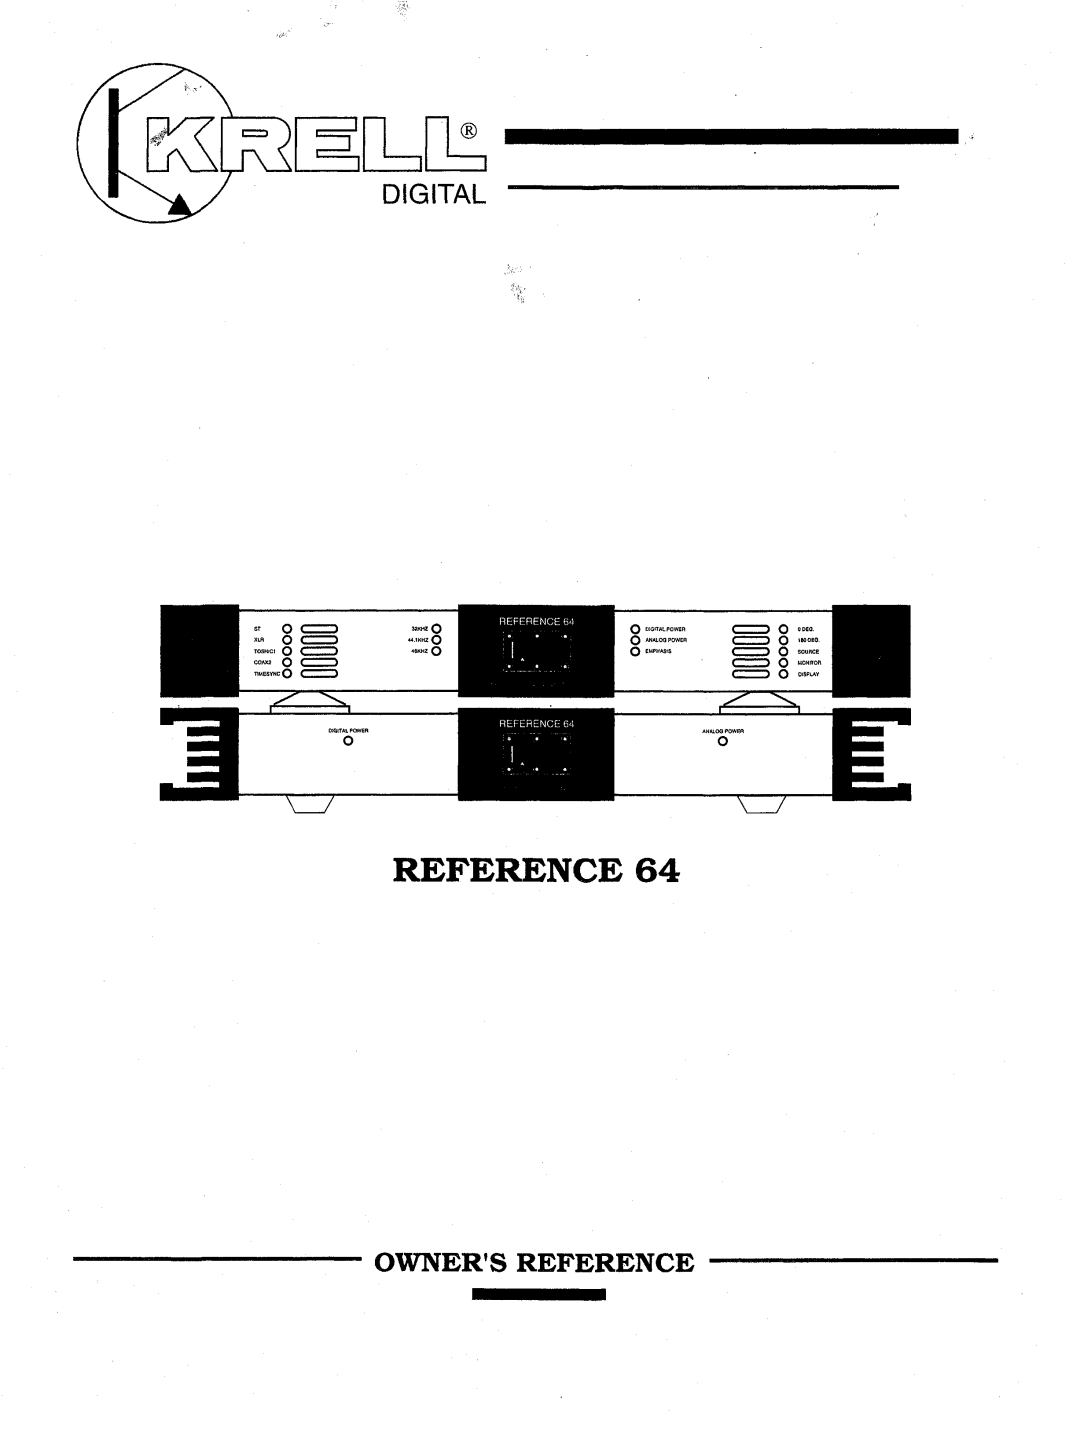 Krell Industries REFERENCE 64 manual Owners Reference, Digital, C== D0 